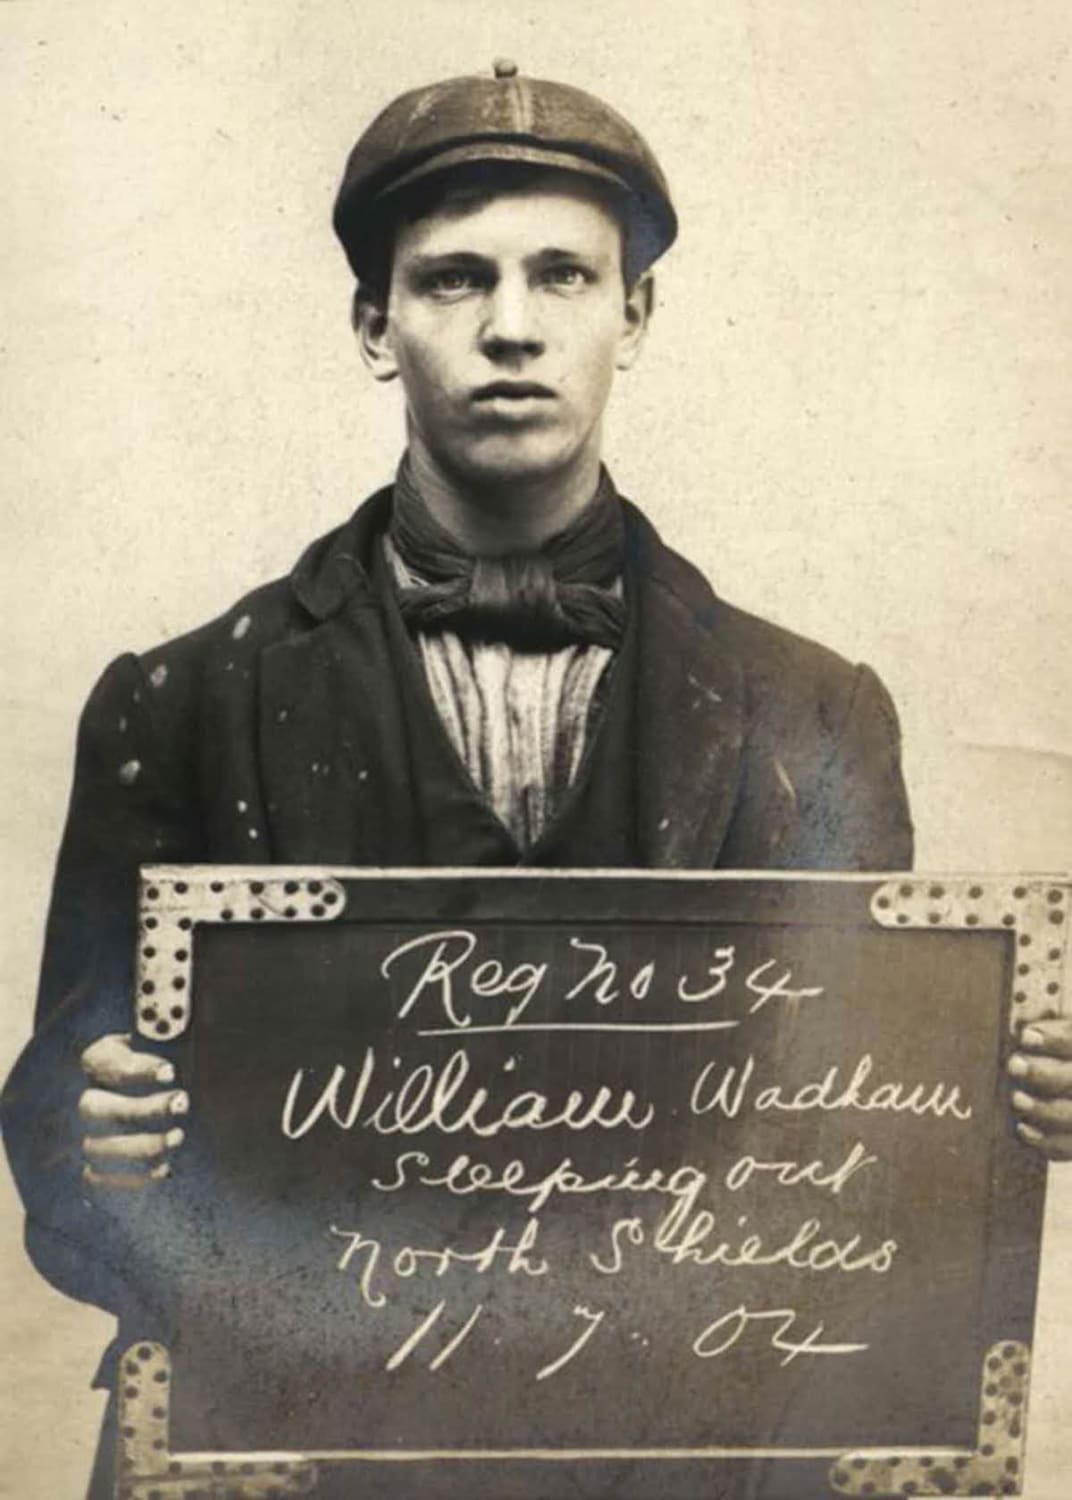 William Wadham arrested for "Sleeping Out", North Shields Police Station, England [July 11, 1904]